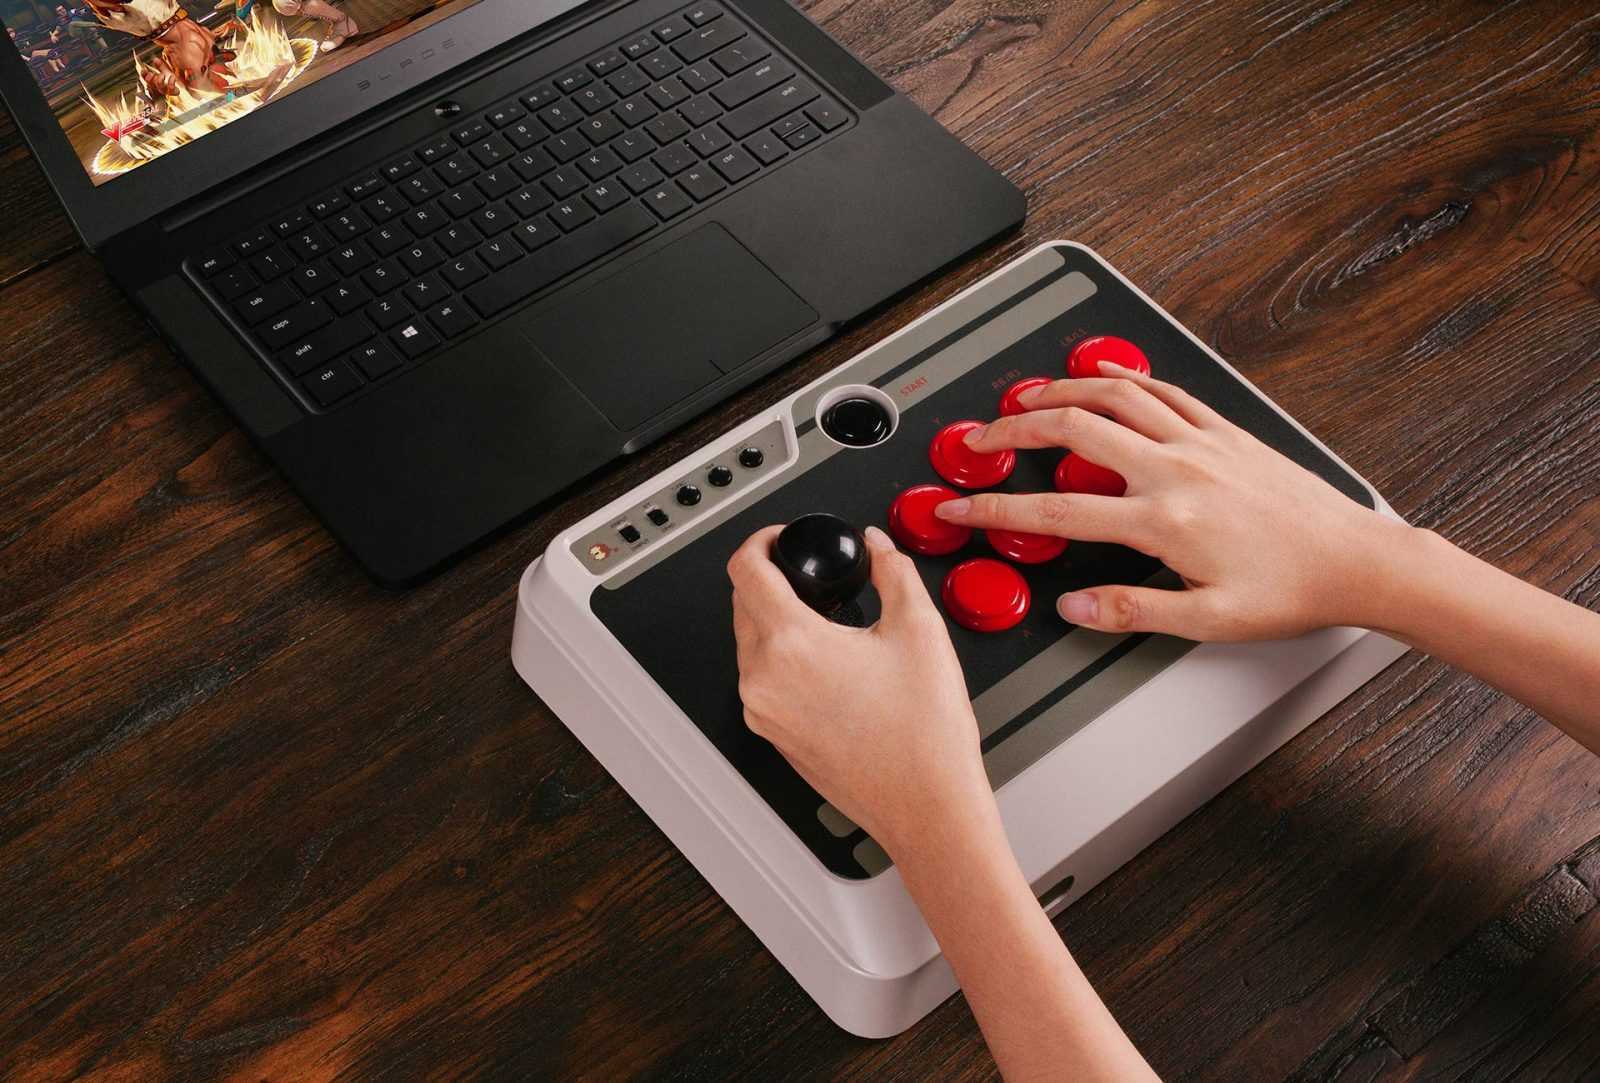 8Bitdo Nes30 Is Compatible with Laptops Too